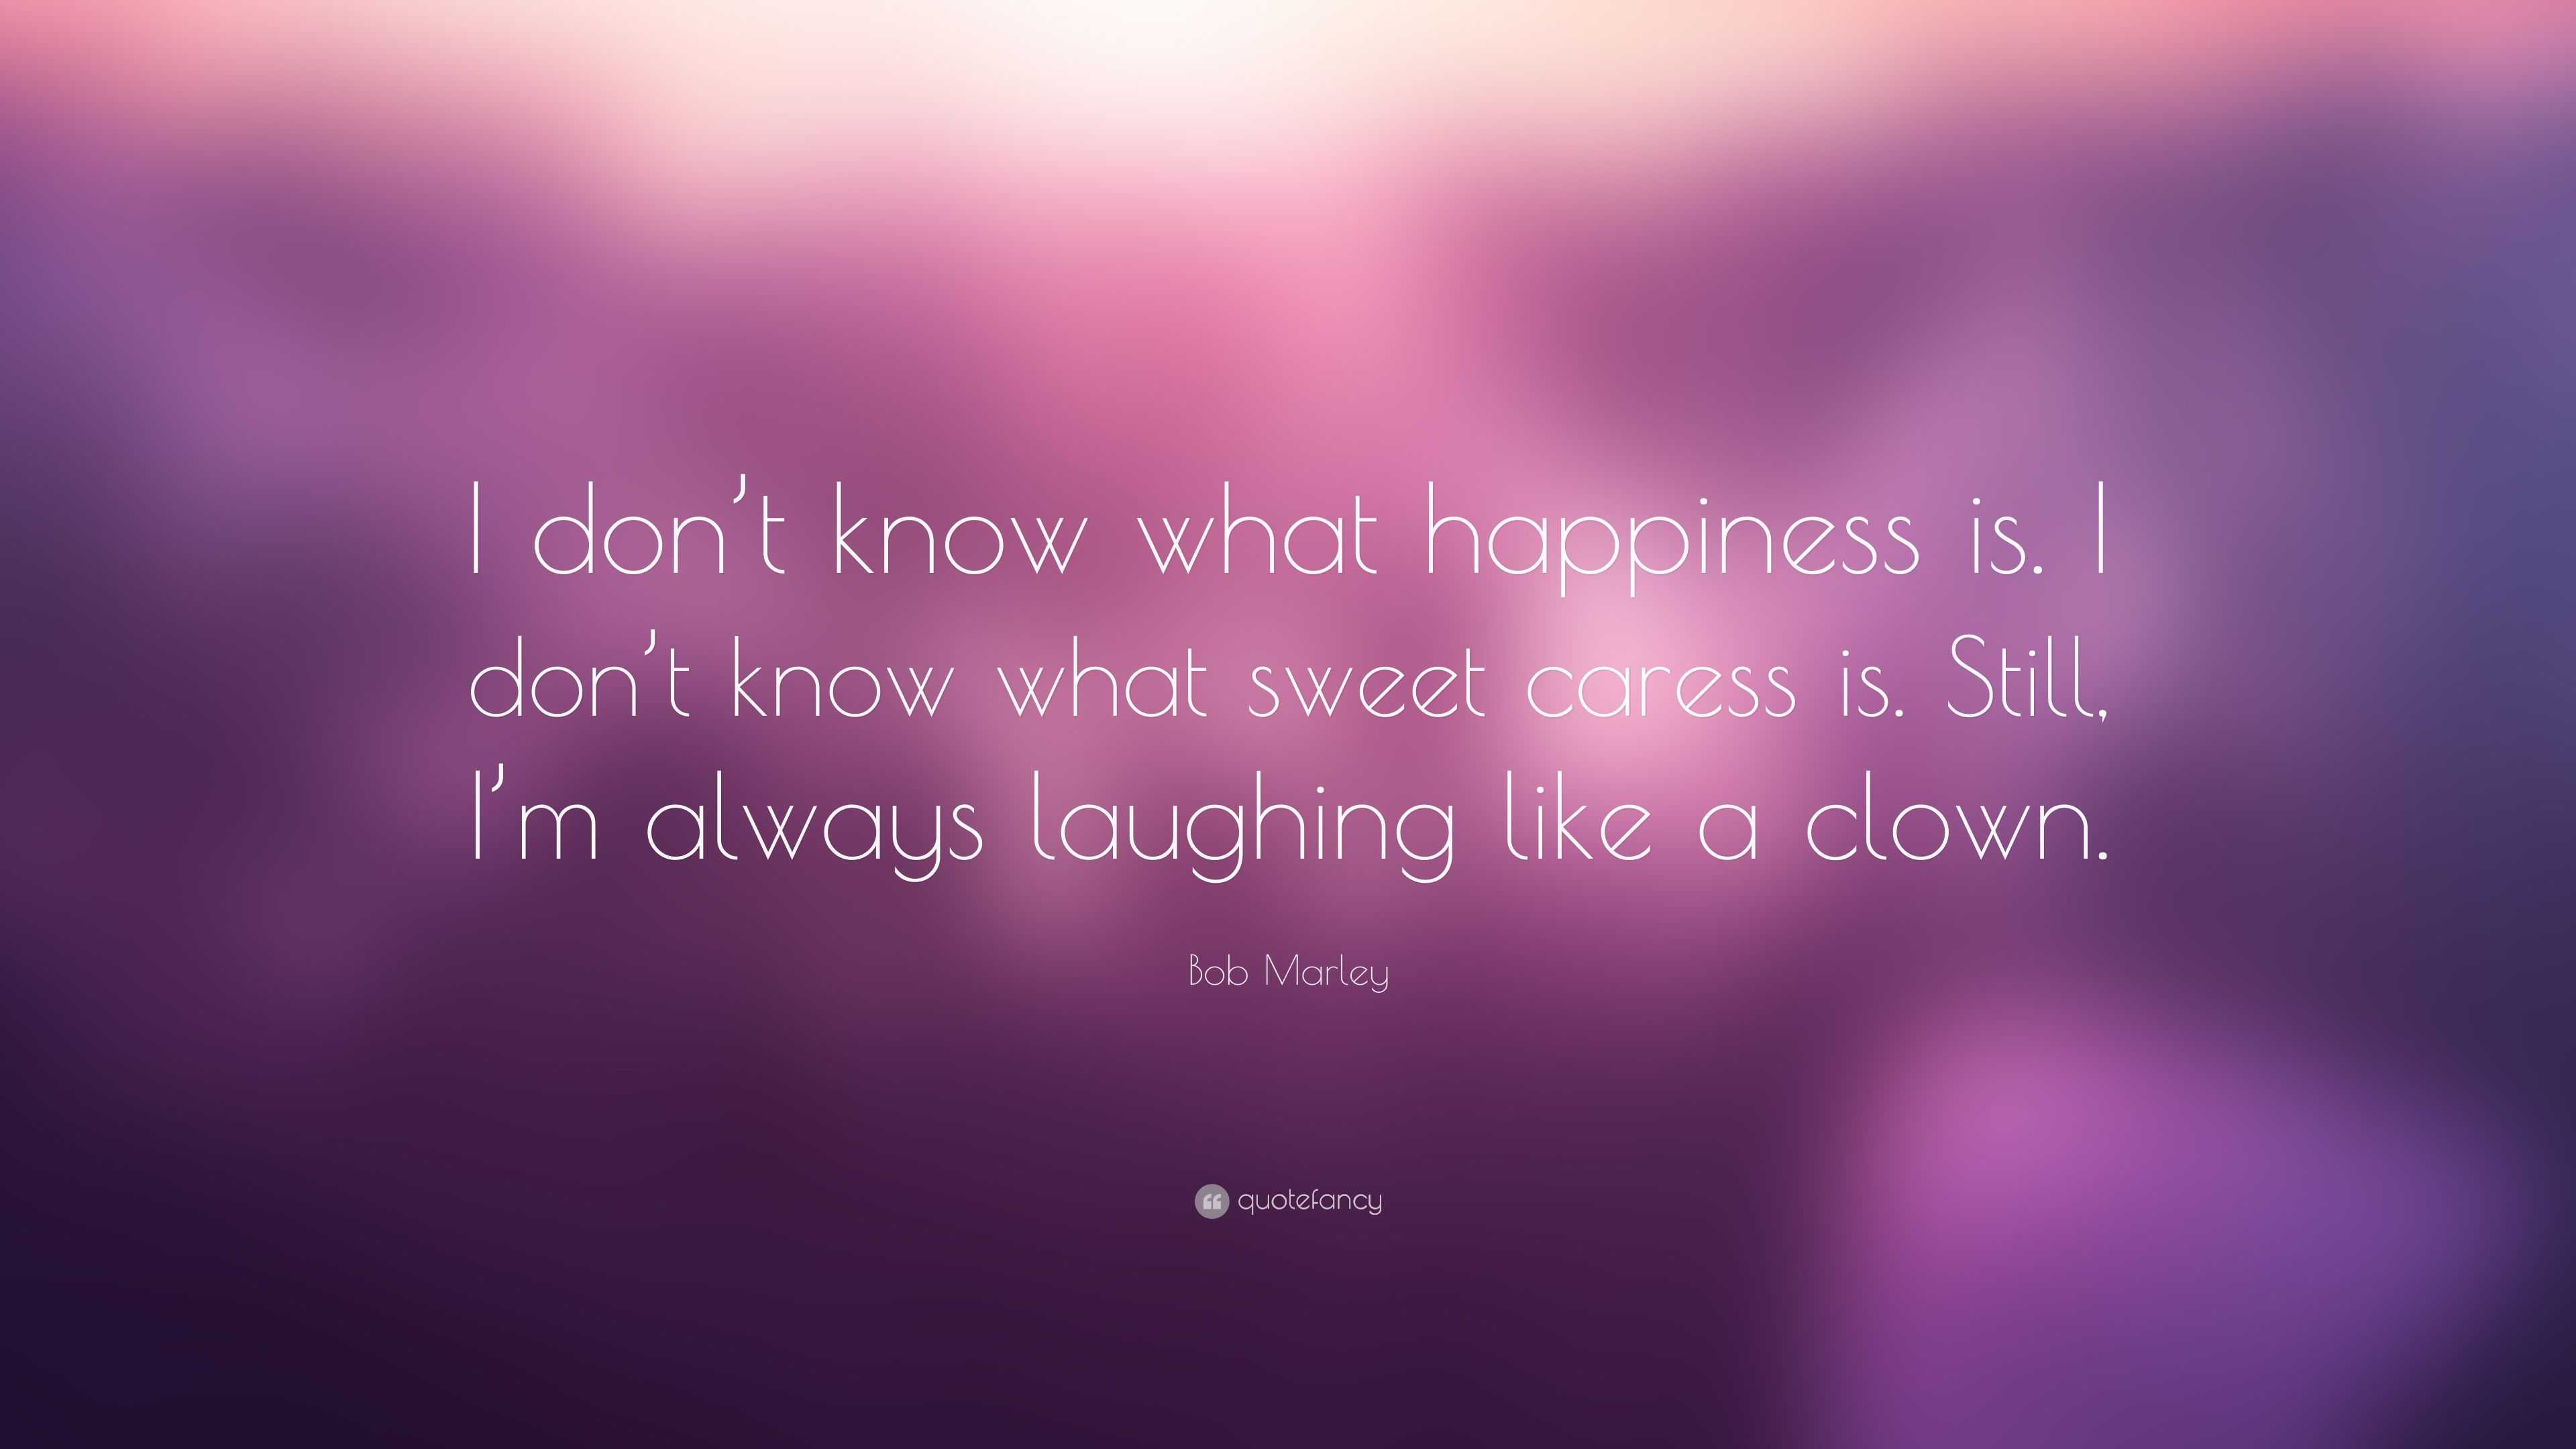 Bob Marley Quote: “I don’t know what happiness is. I don’t know what ...